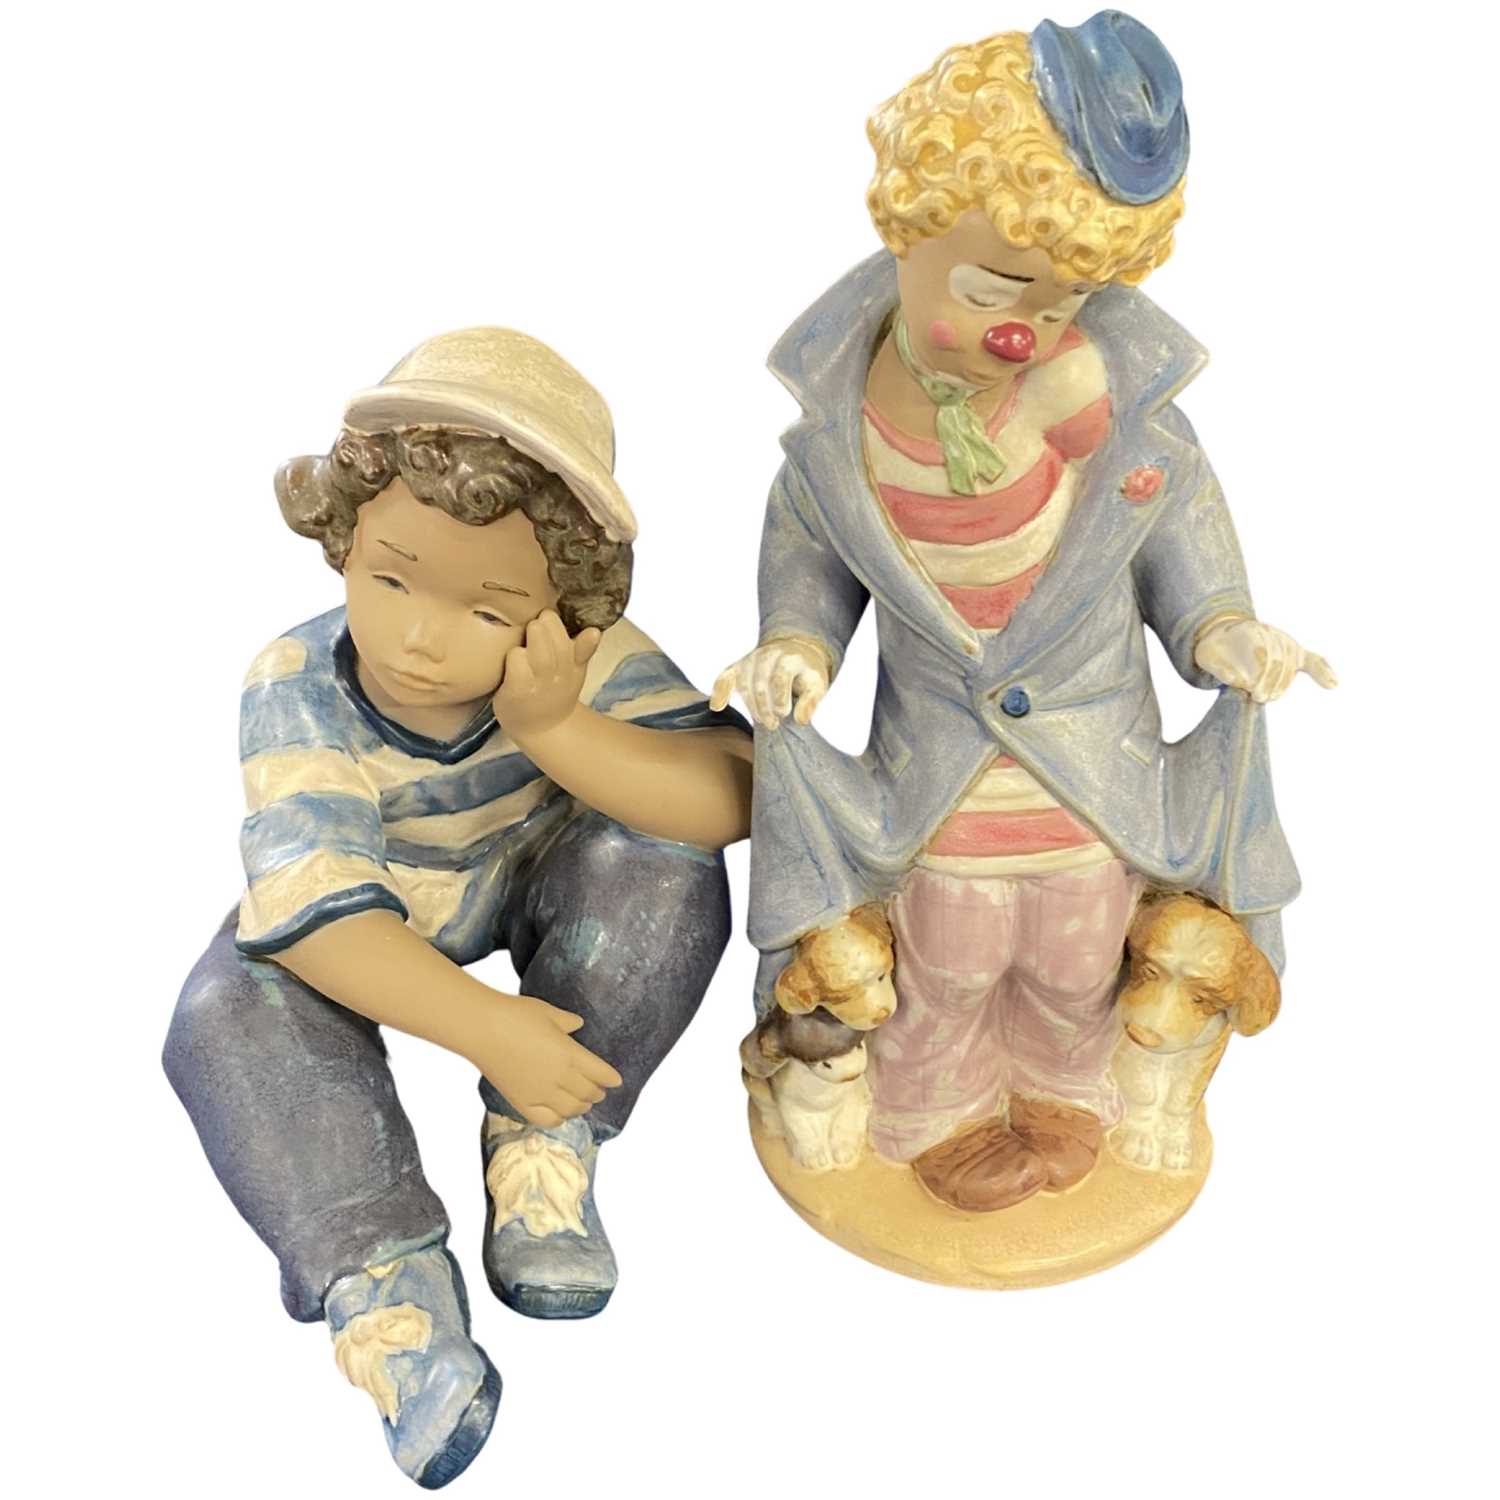 Lladro model of a clown together with a Lladro model of a young boy with baseball cap, the clown